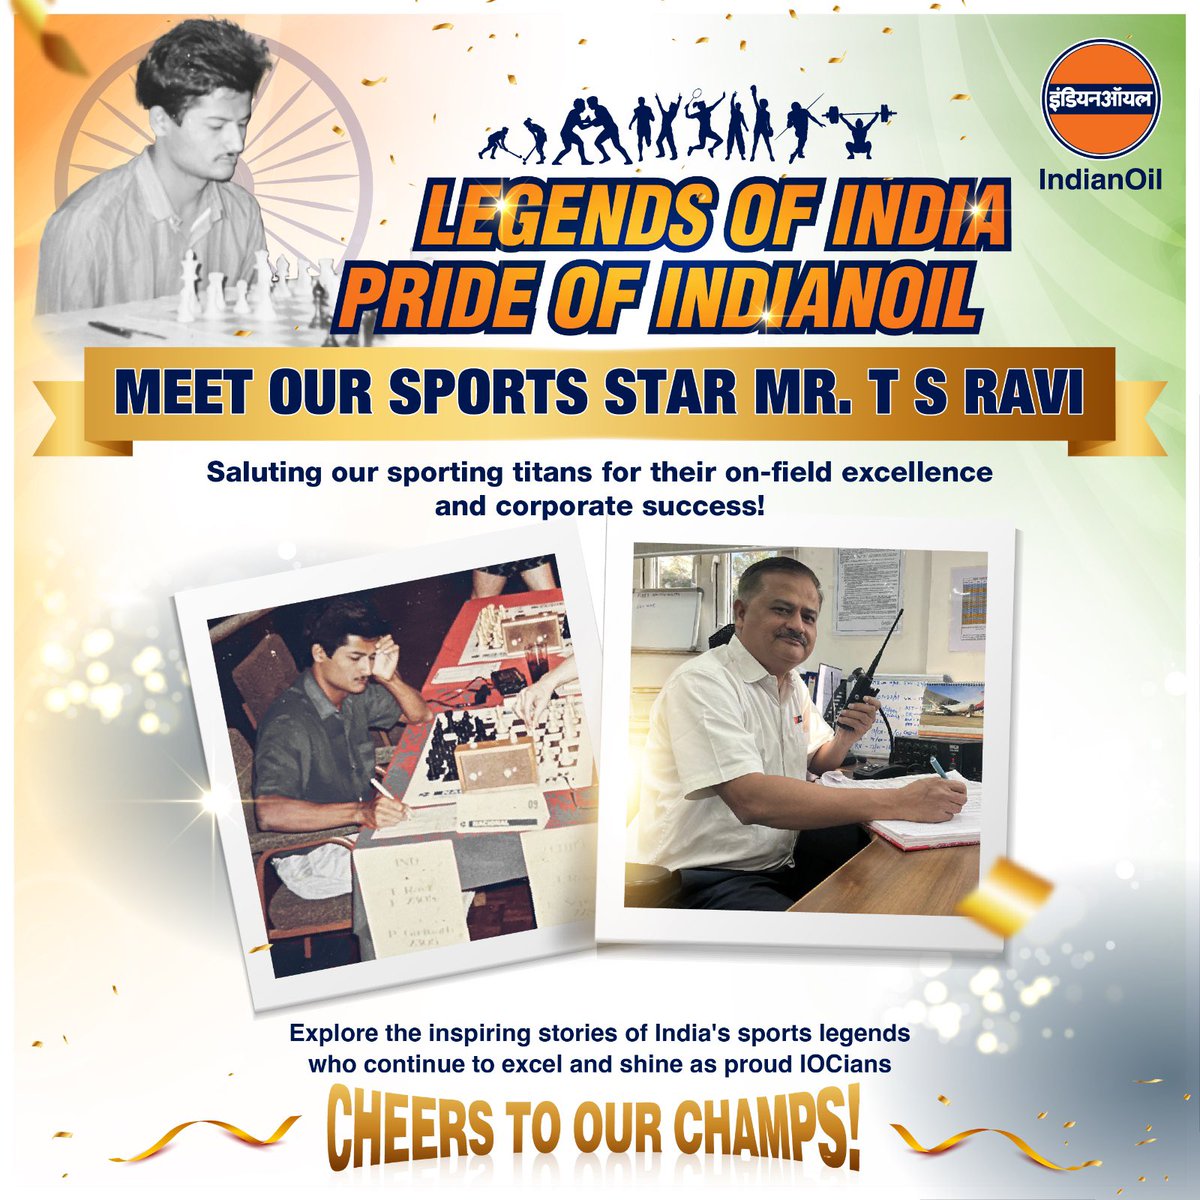 #TuesdayTryst introduces T S Ravi, a Chess legend who now serves #IndianOil with the same drive and determination! From the chessboard to the office, his story is a testament to hard work and success. Read his story:iocl.com/uploads/tuesda…